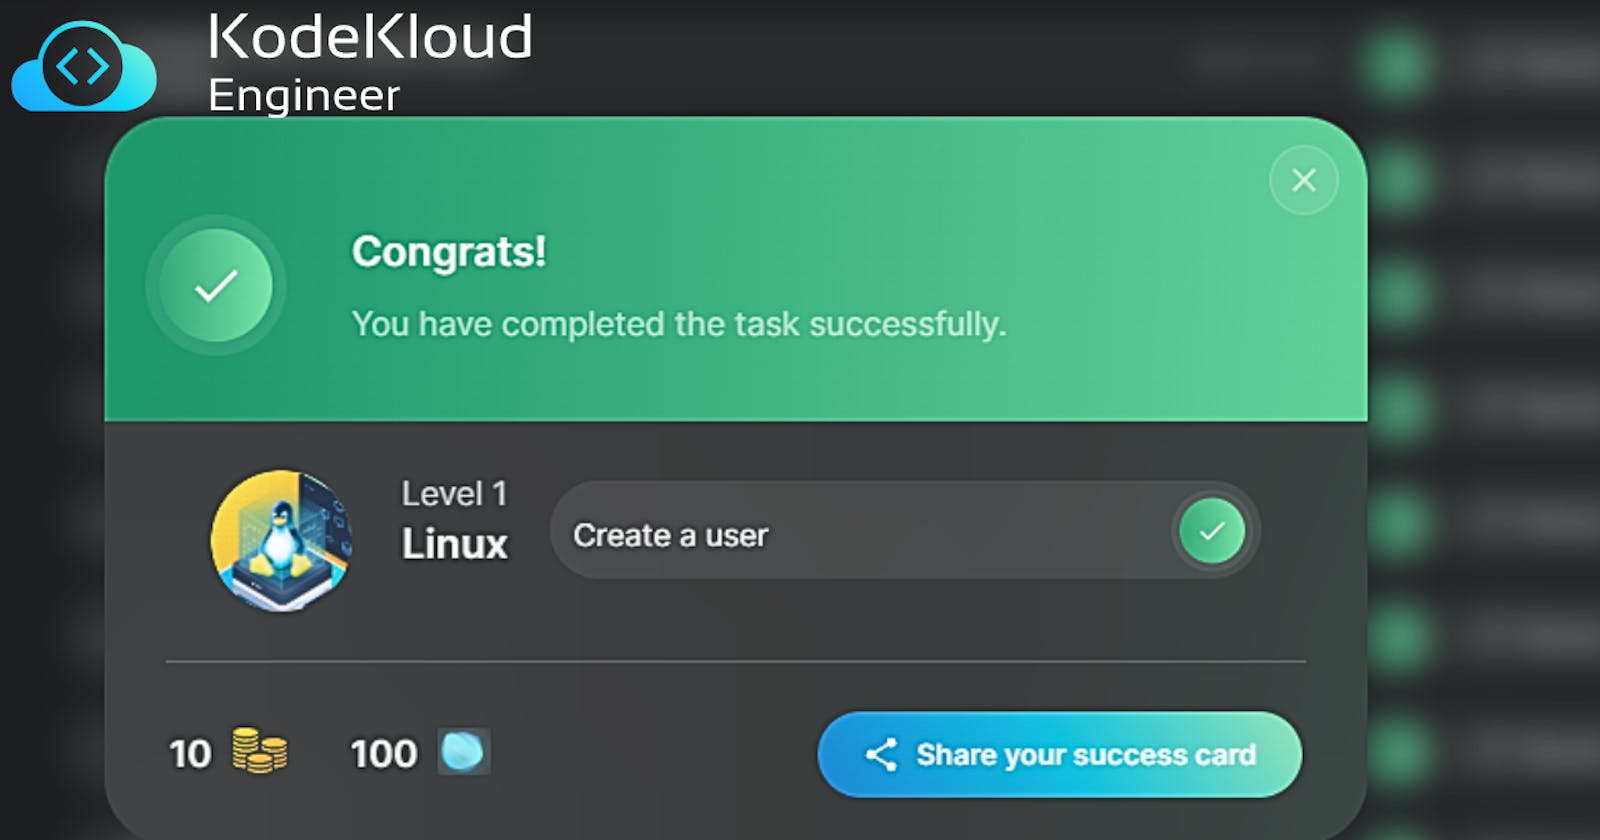 Step by step approach of Linux task on creating a user by the KodeKloud Engineer Program: